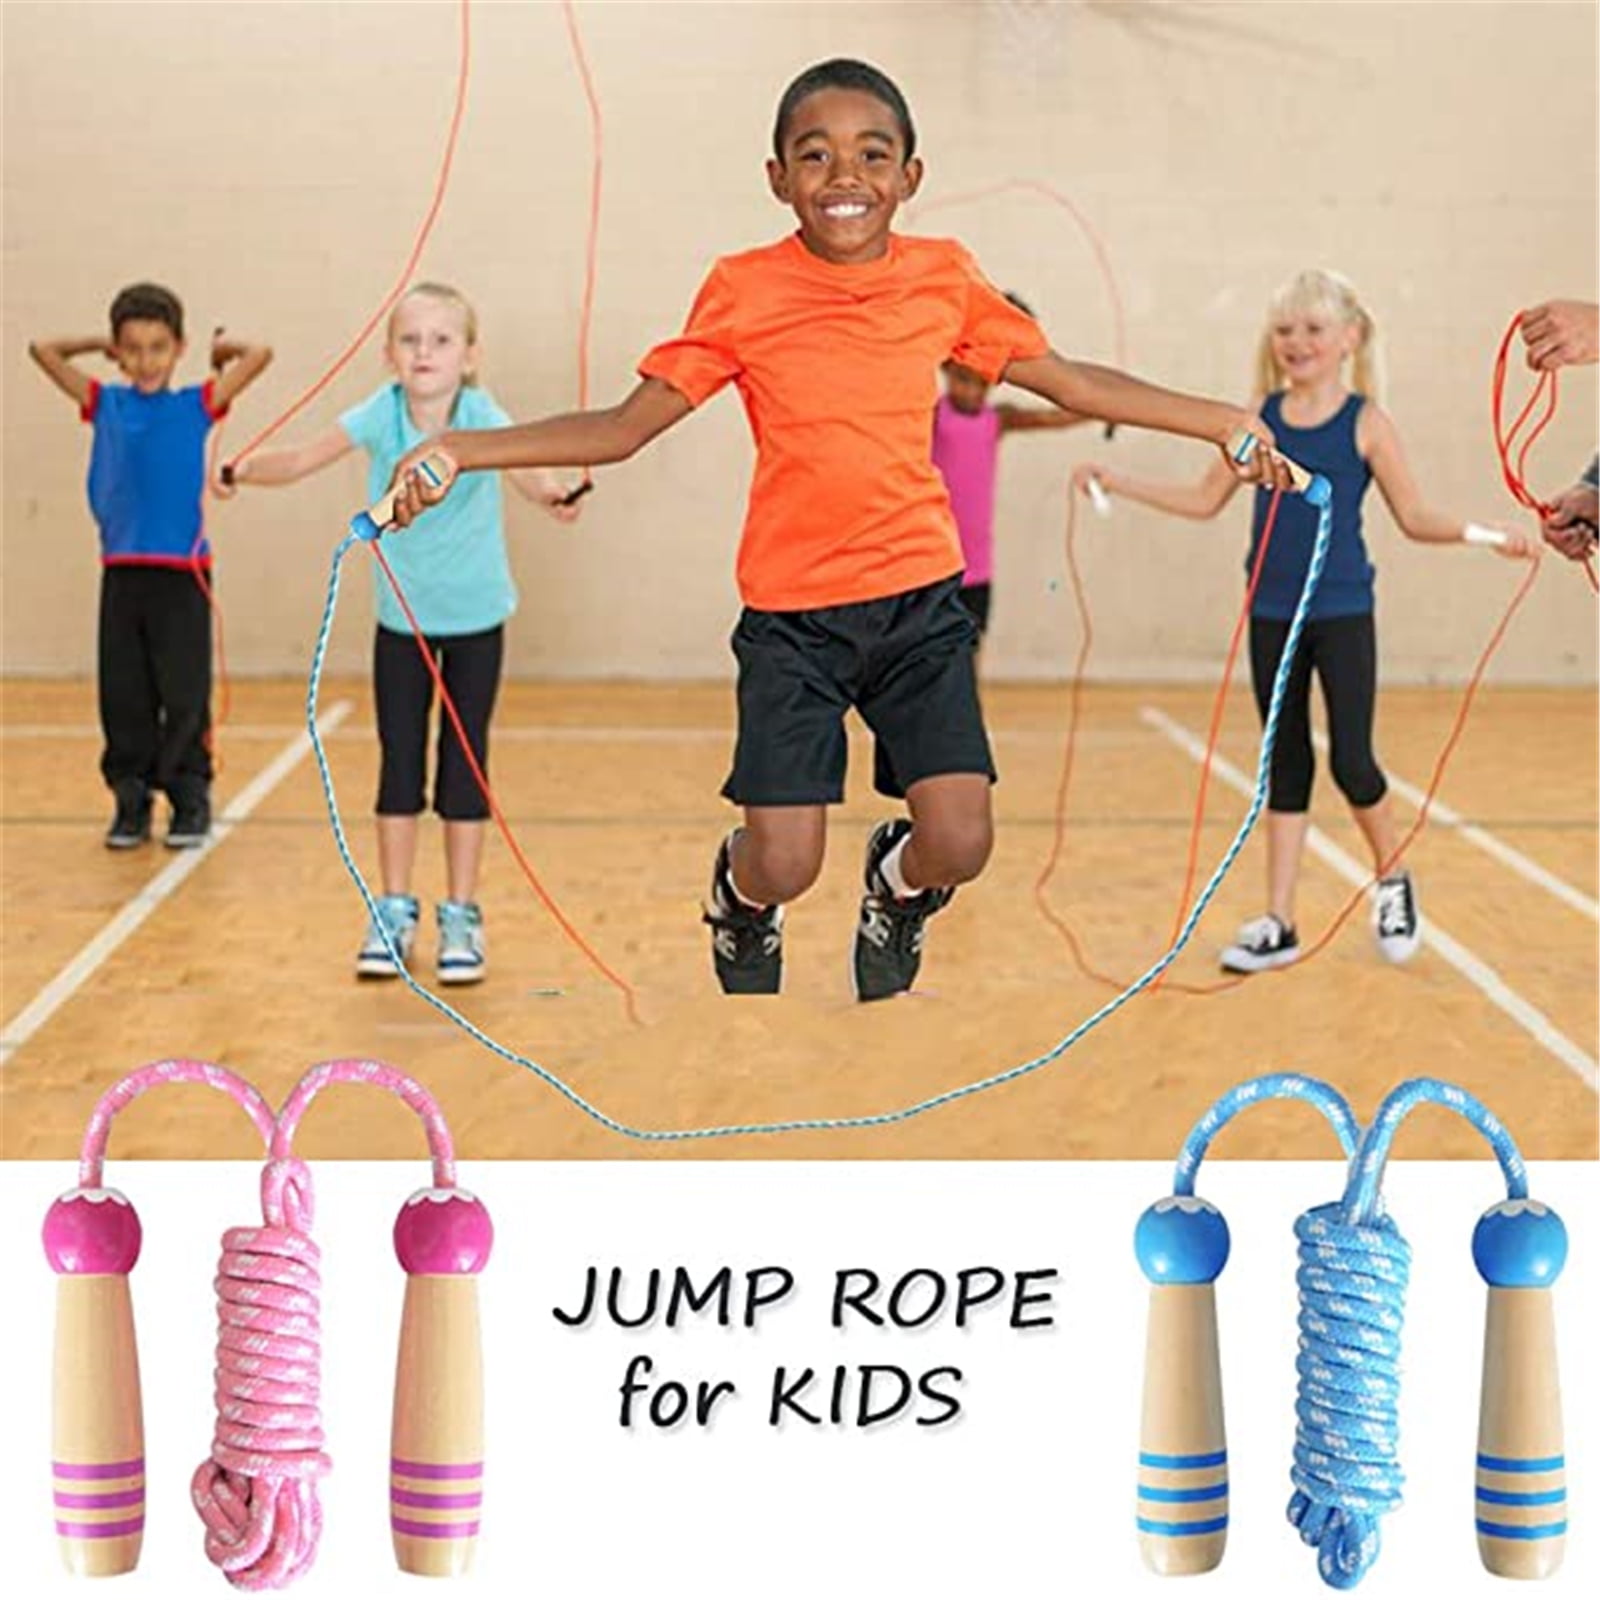 Wooden Skipping Rope Kids Exercise Jumping Games Adult Fitness Boxing Gym UK 